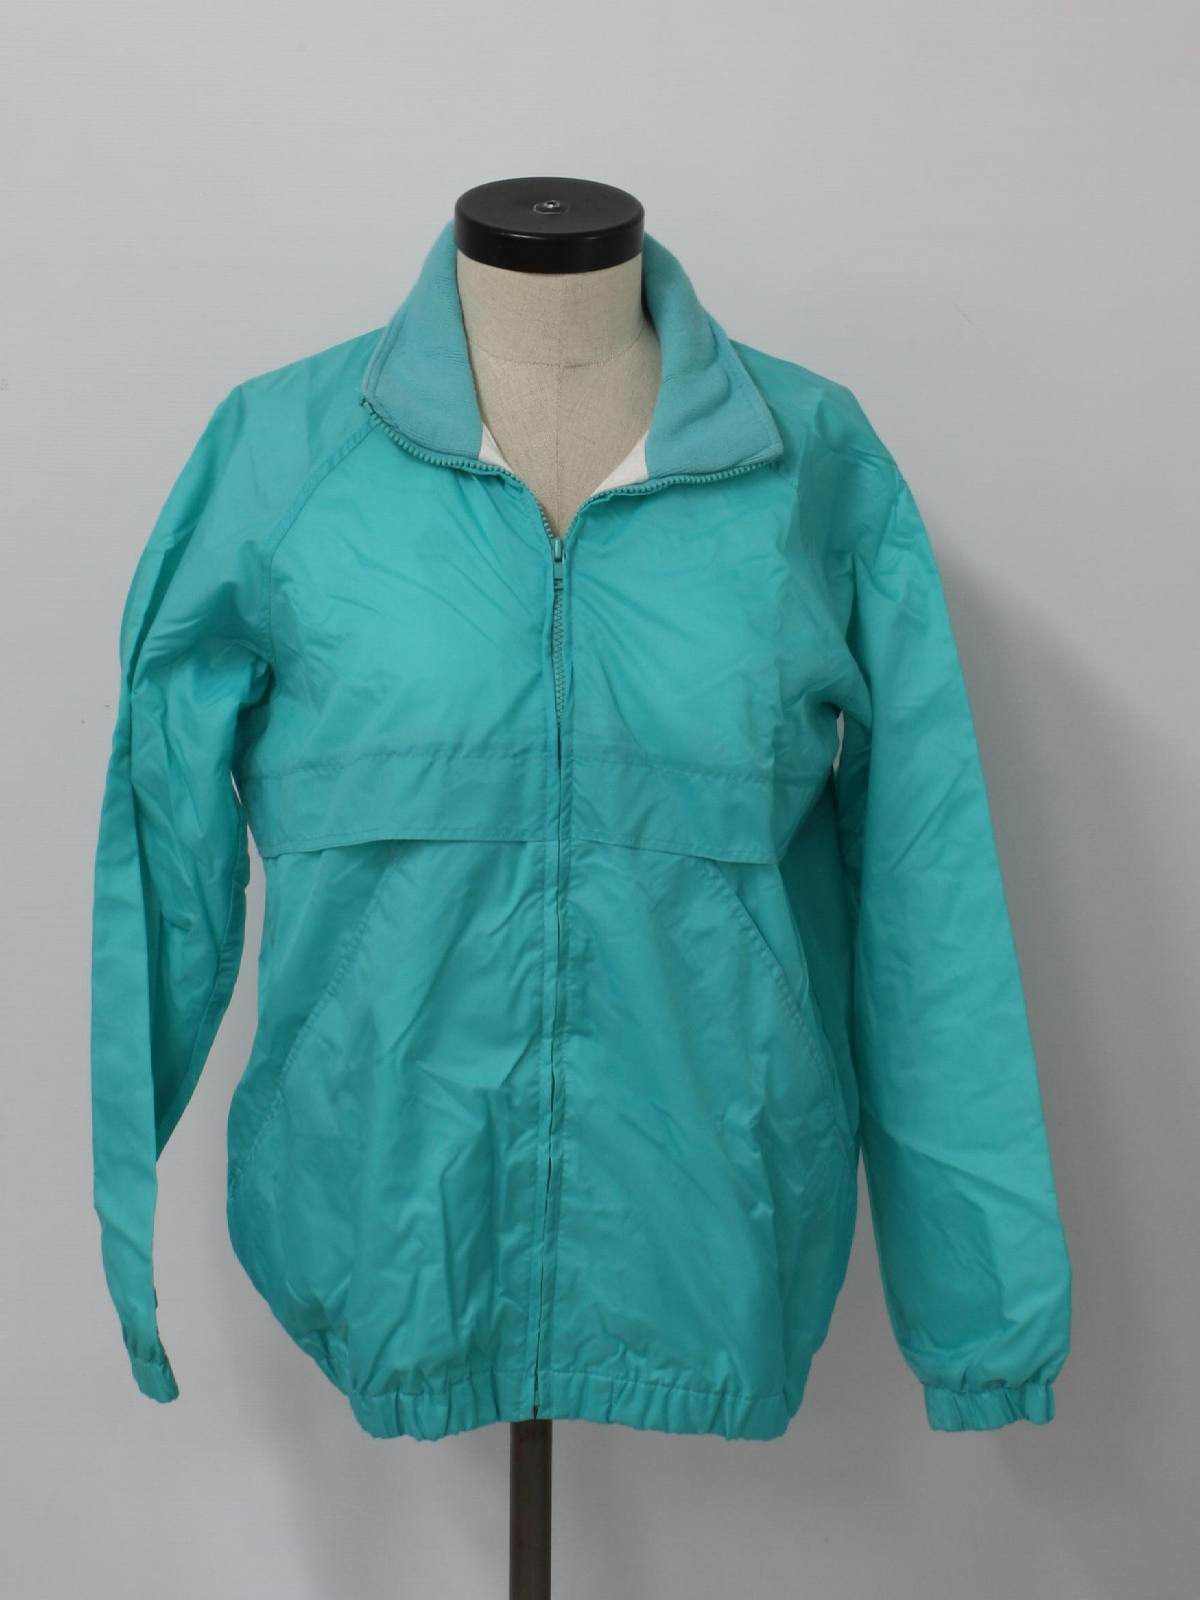 Eighties Vintage Jacket: 80s -Be in the current seen- Womens teal blue ...